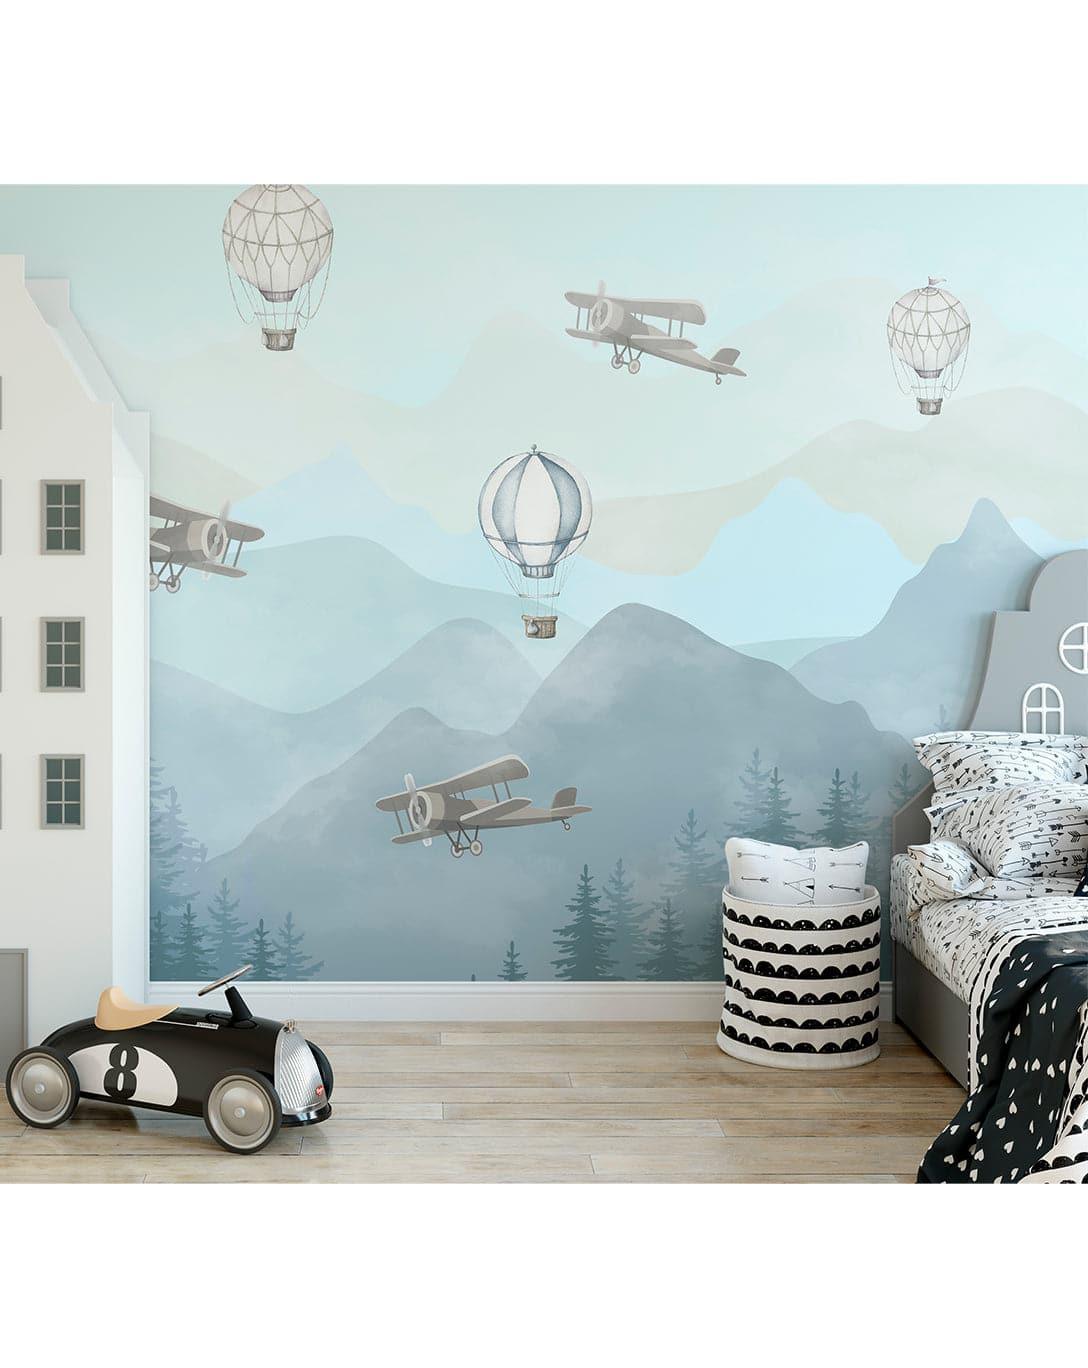 Hot Air Balloons Airplanes and Mountains Self Adhesive Wall Mural Hot Air Balloons Airplanes and Mountains Self Adhesive Wall Mural 